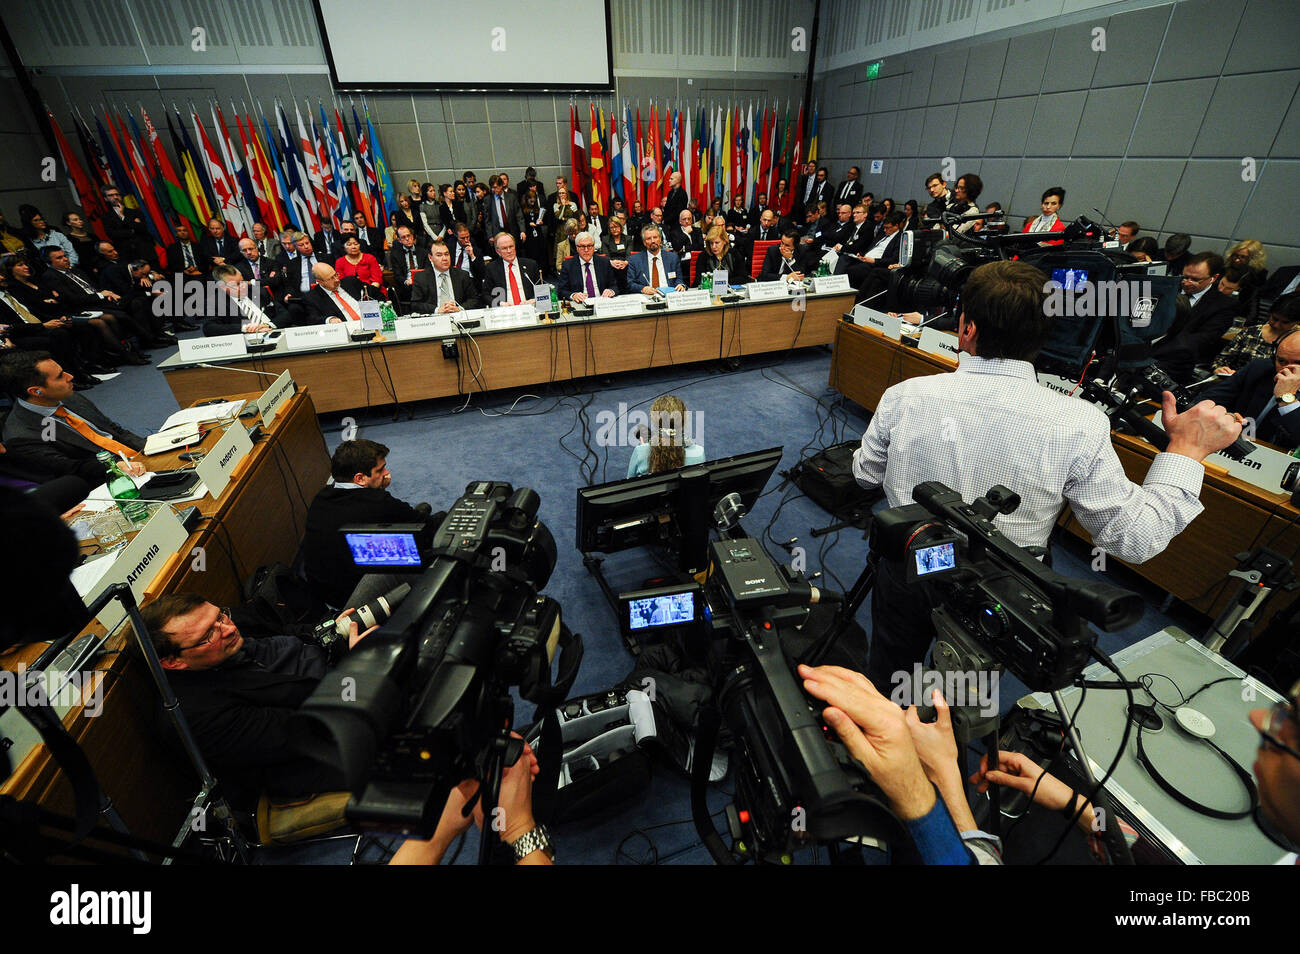 Vienna, Austria. 14th Jan, 2016. A session of the permanent council of the OSCE, the Organization for Security and Cooperation in Europe, is held at its headquarters in Vienna, Austria, Jan. 14, 2016. © Qian Yi/Xinhua/Alamy Live News Stock Photo